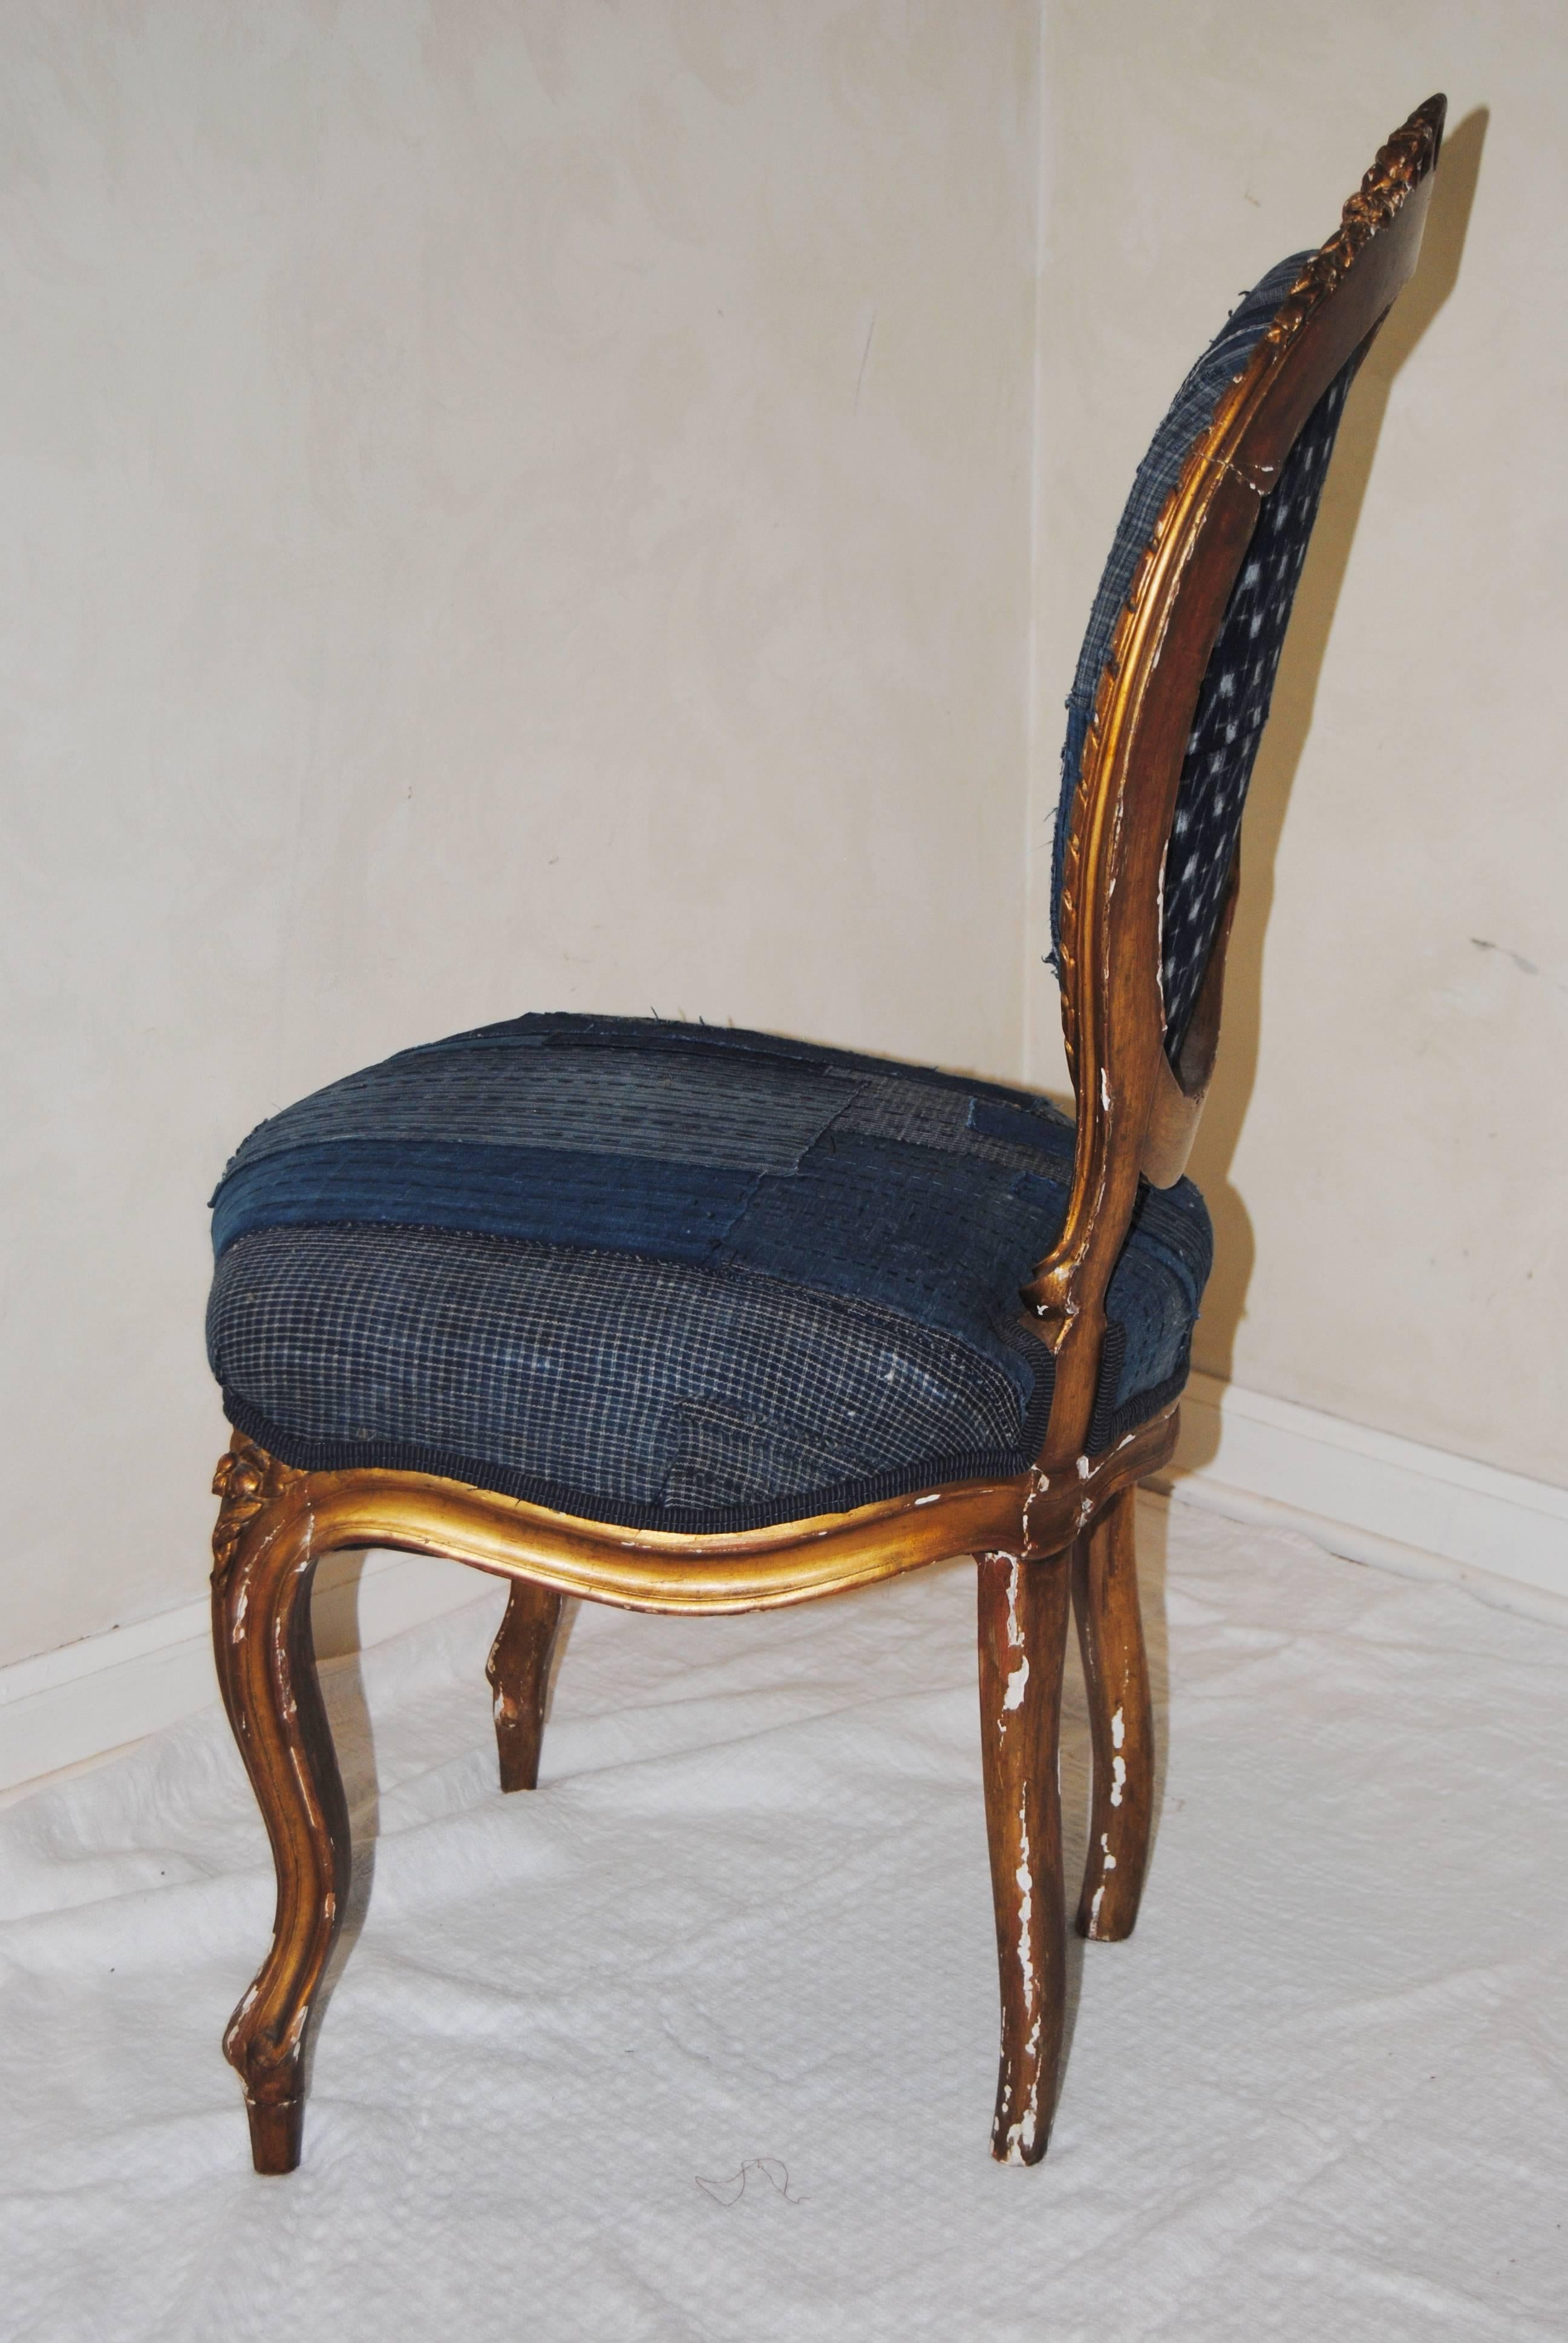 19th Century Antique French Gilt Chair Upholstered in an Antique Japanese Indigo Boro Textile For Sale